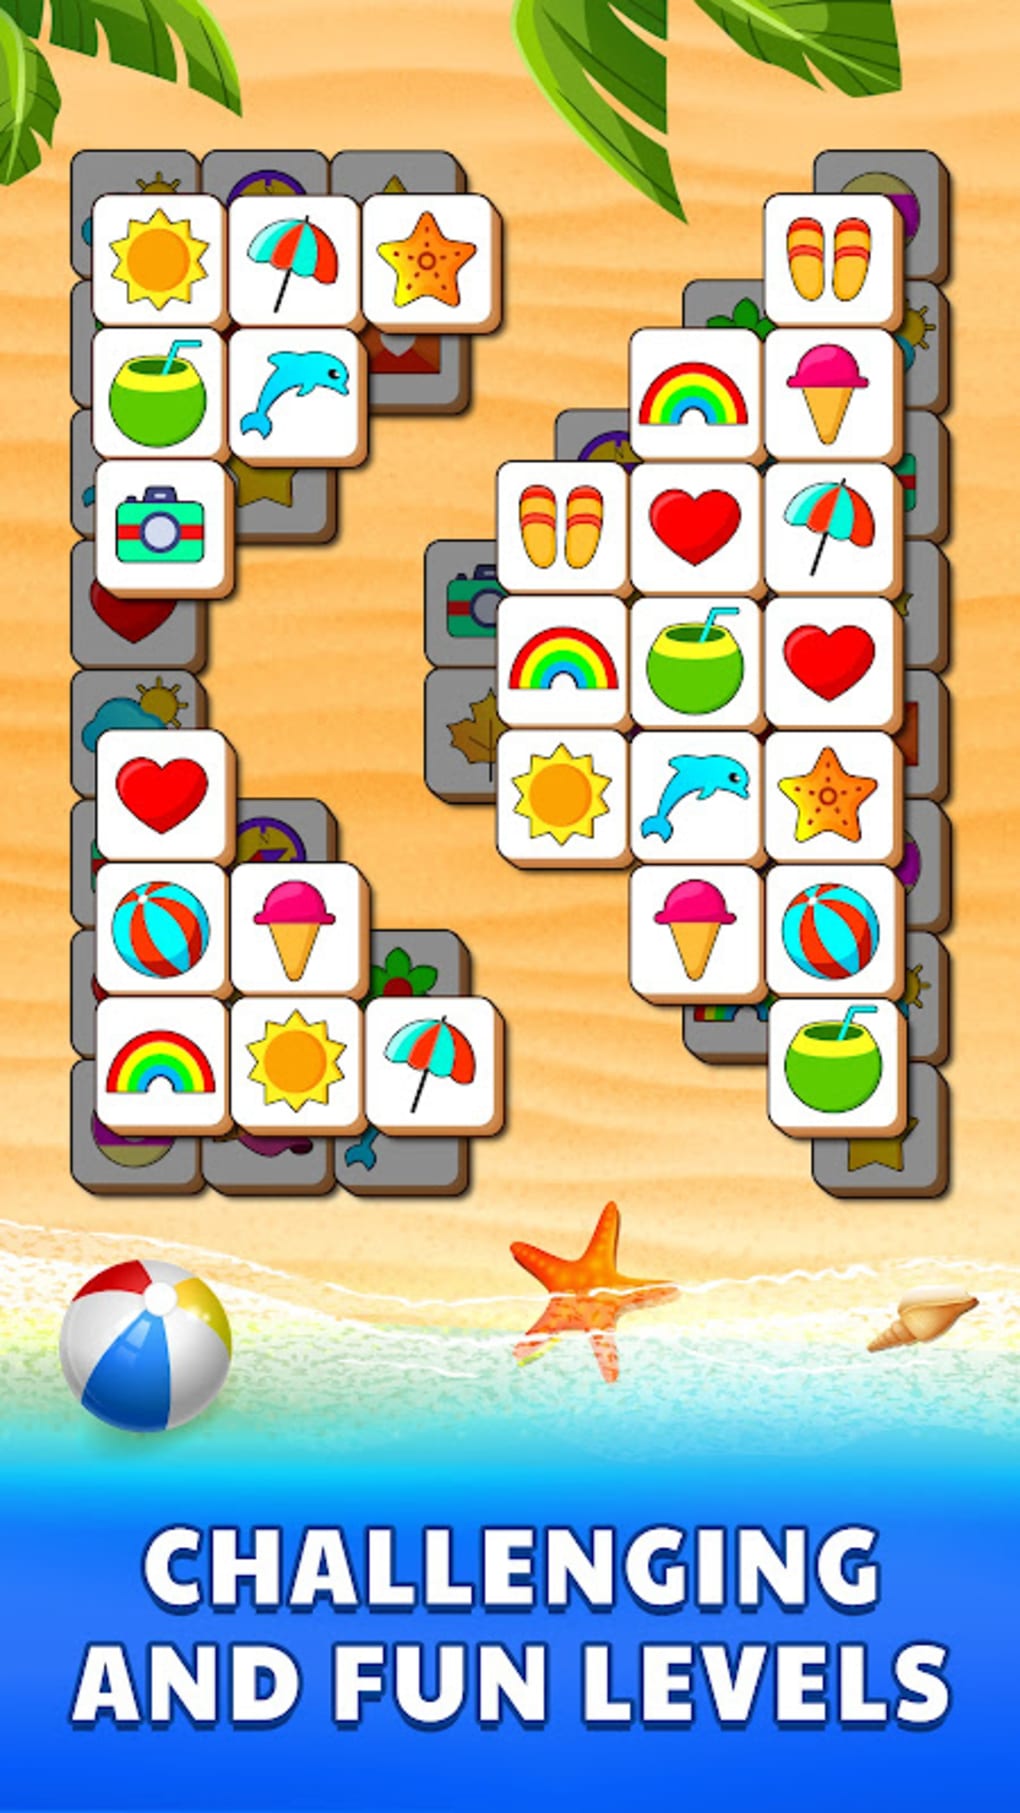 download the last version for android Tile Puzzle Game: Tiles Match